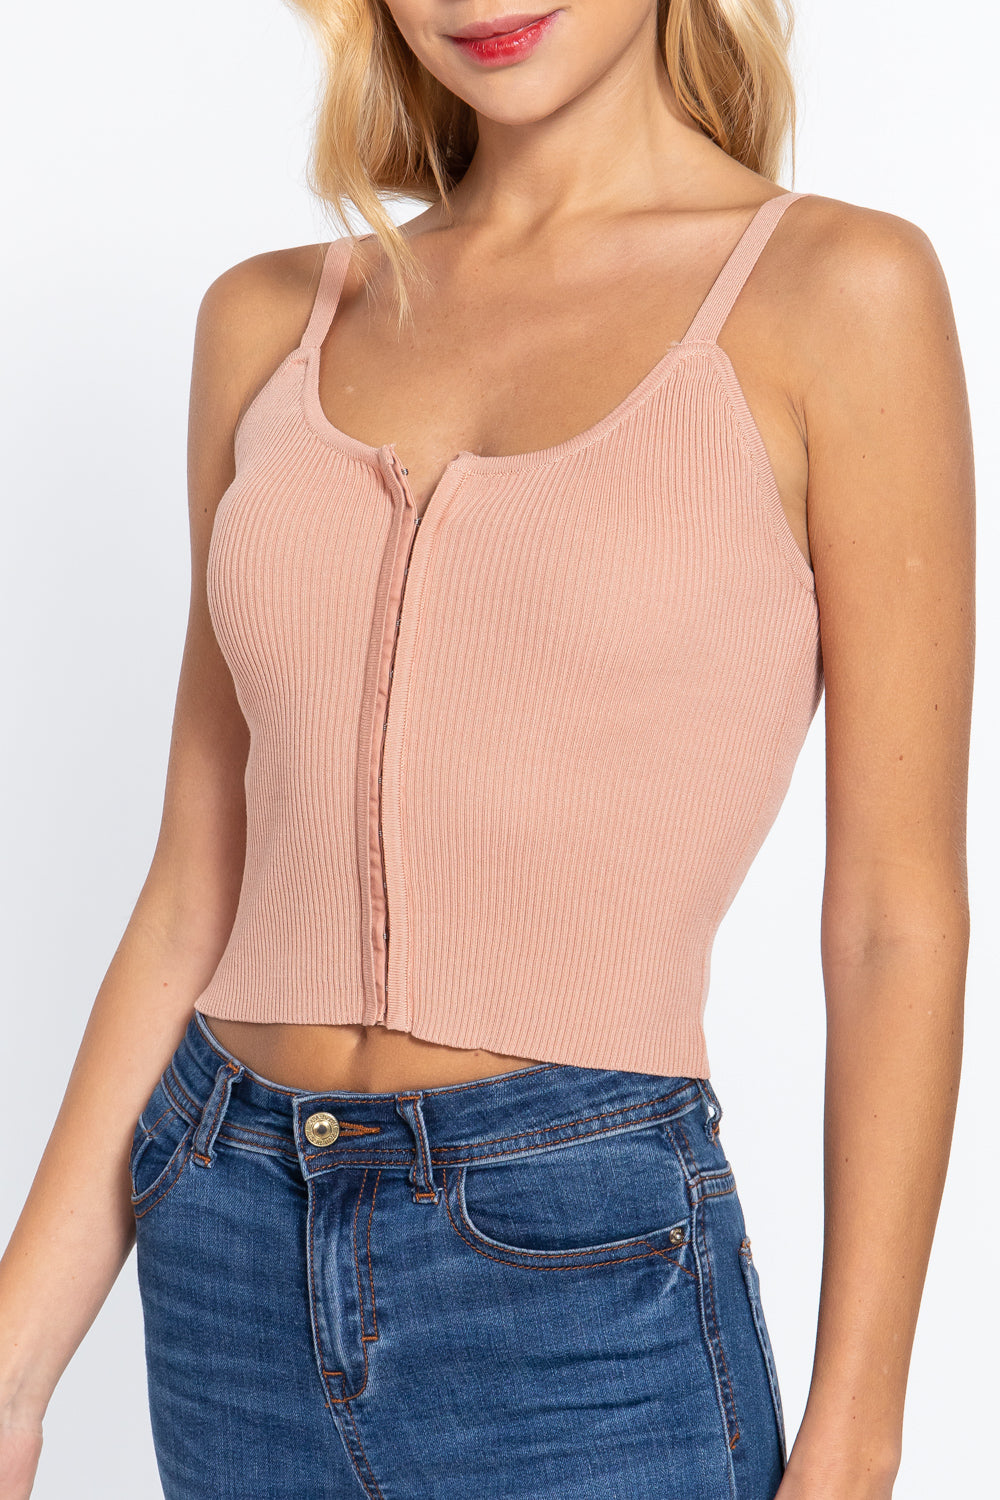 Front Closure Pearl Pink With Hooks Sweater Cami Top Shirts & Tops jehouze 